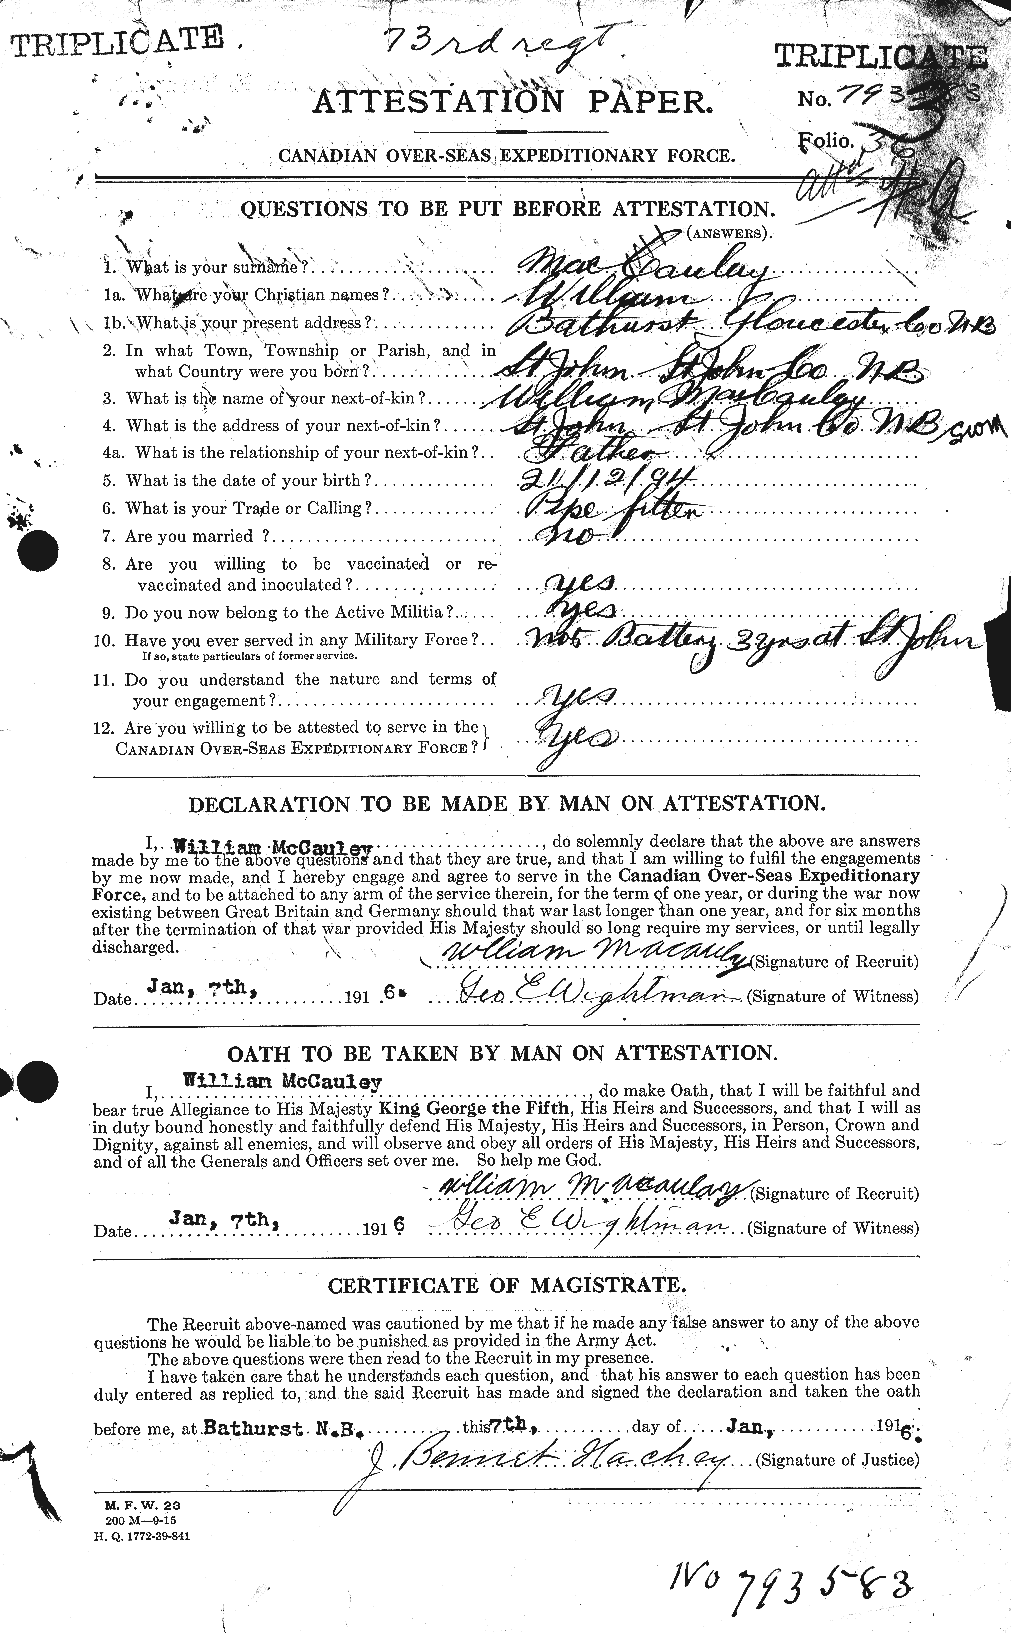 Personnel Records of the First World War - CEF 132600a